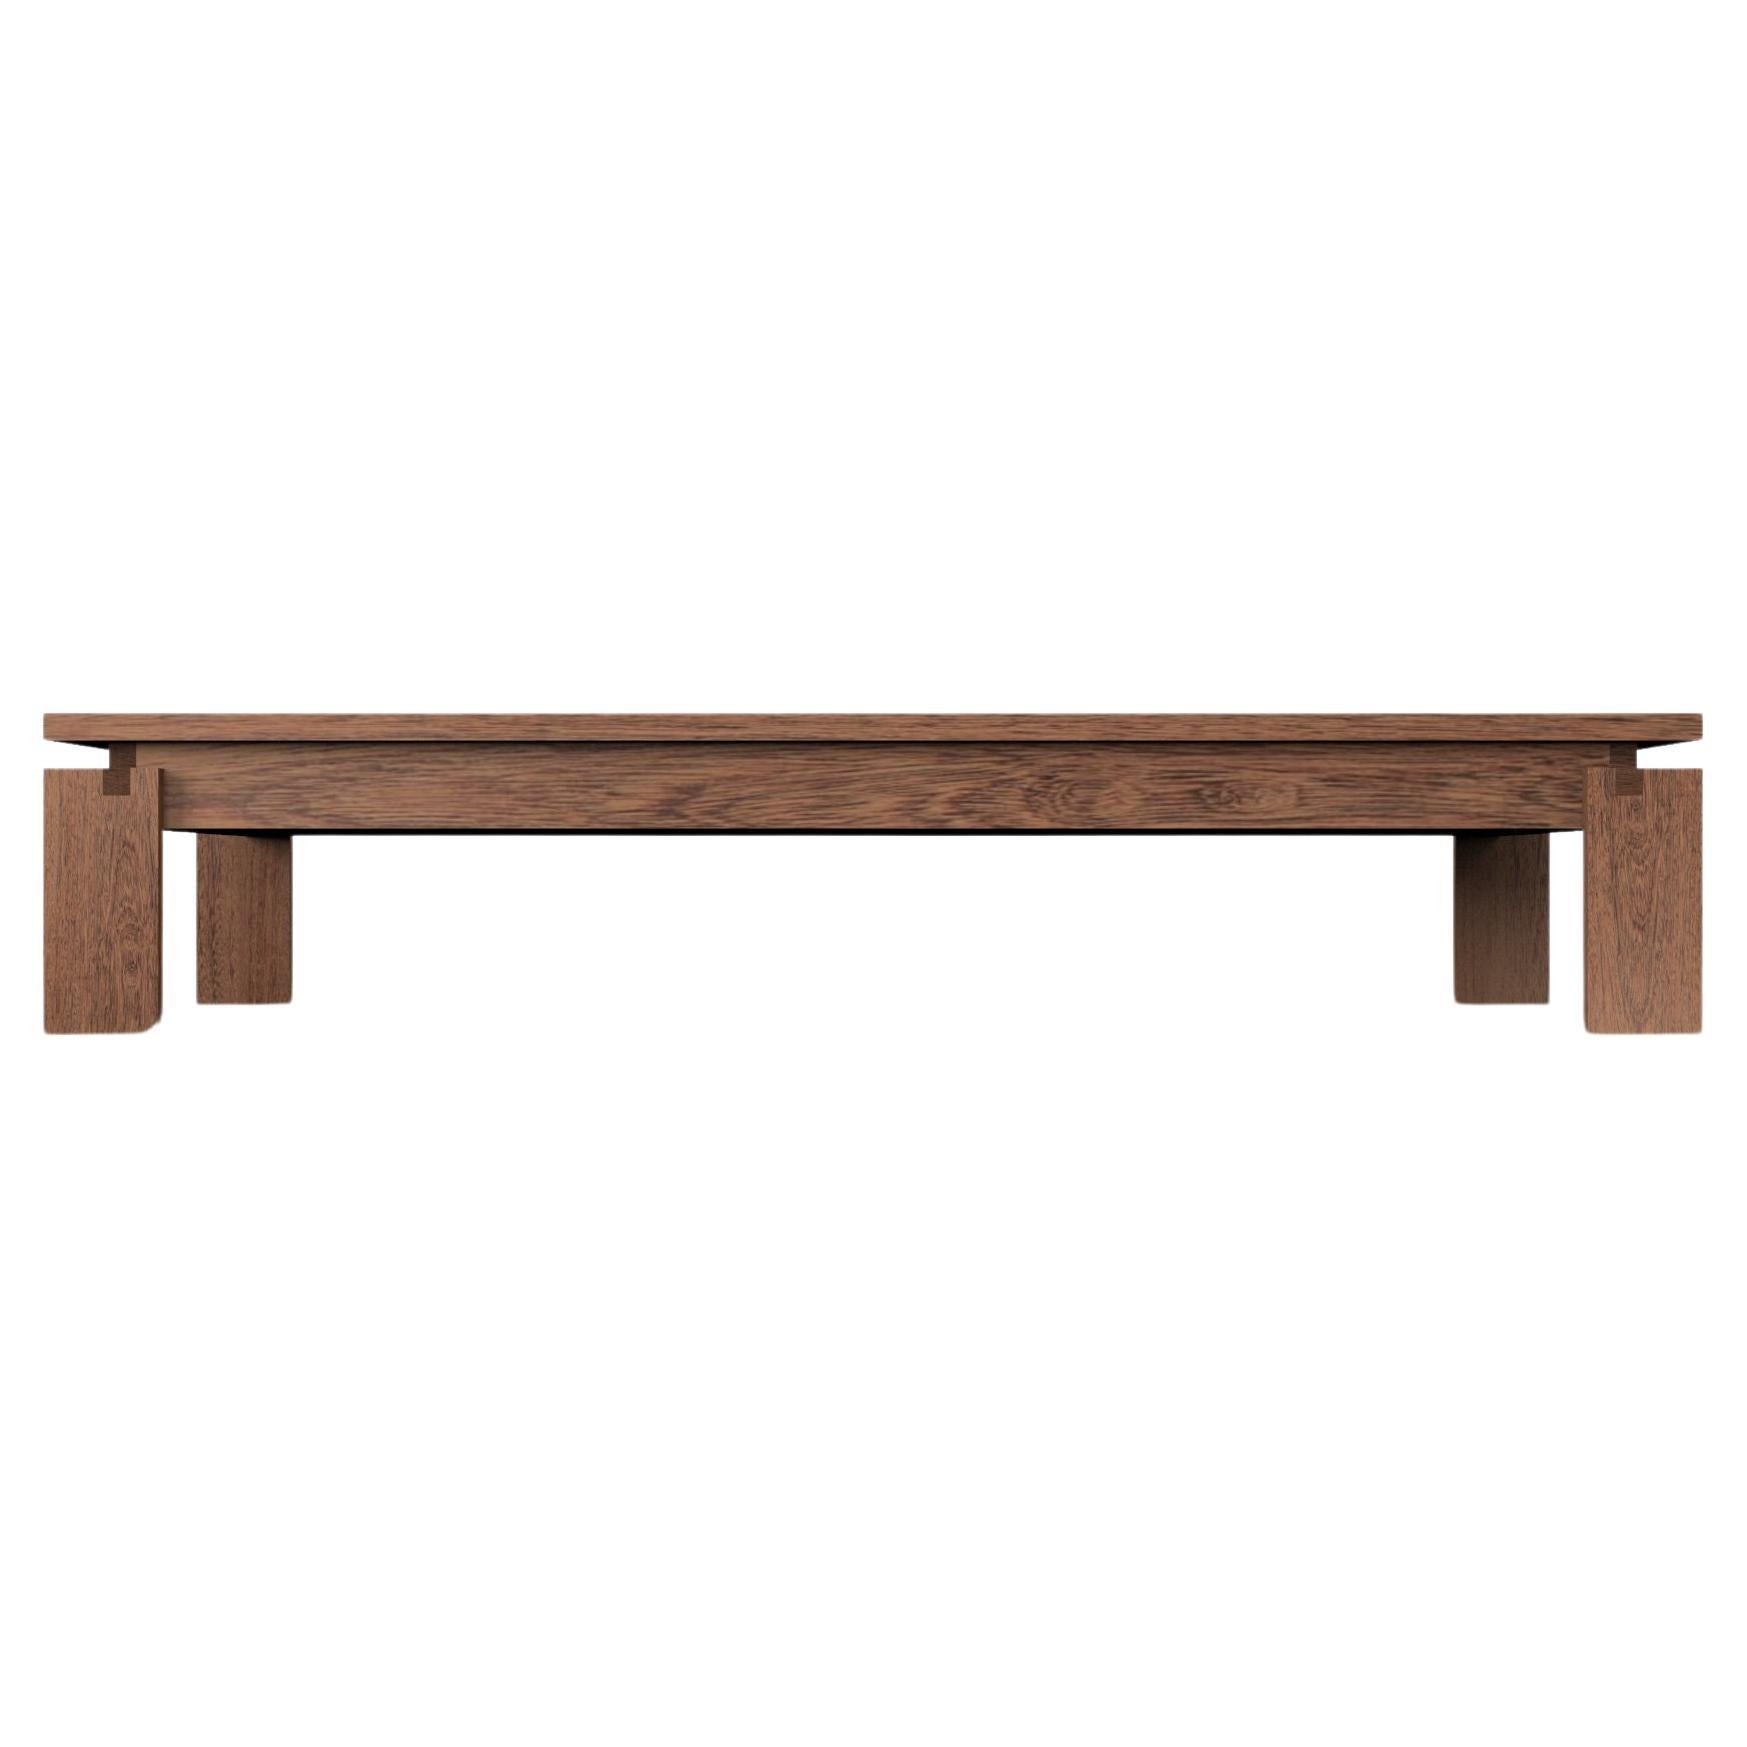 Contemporary Handcrafted Center Table in Brazilian Hardwood by Leo Strauss